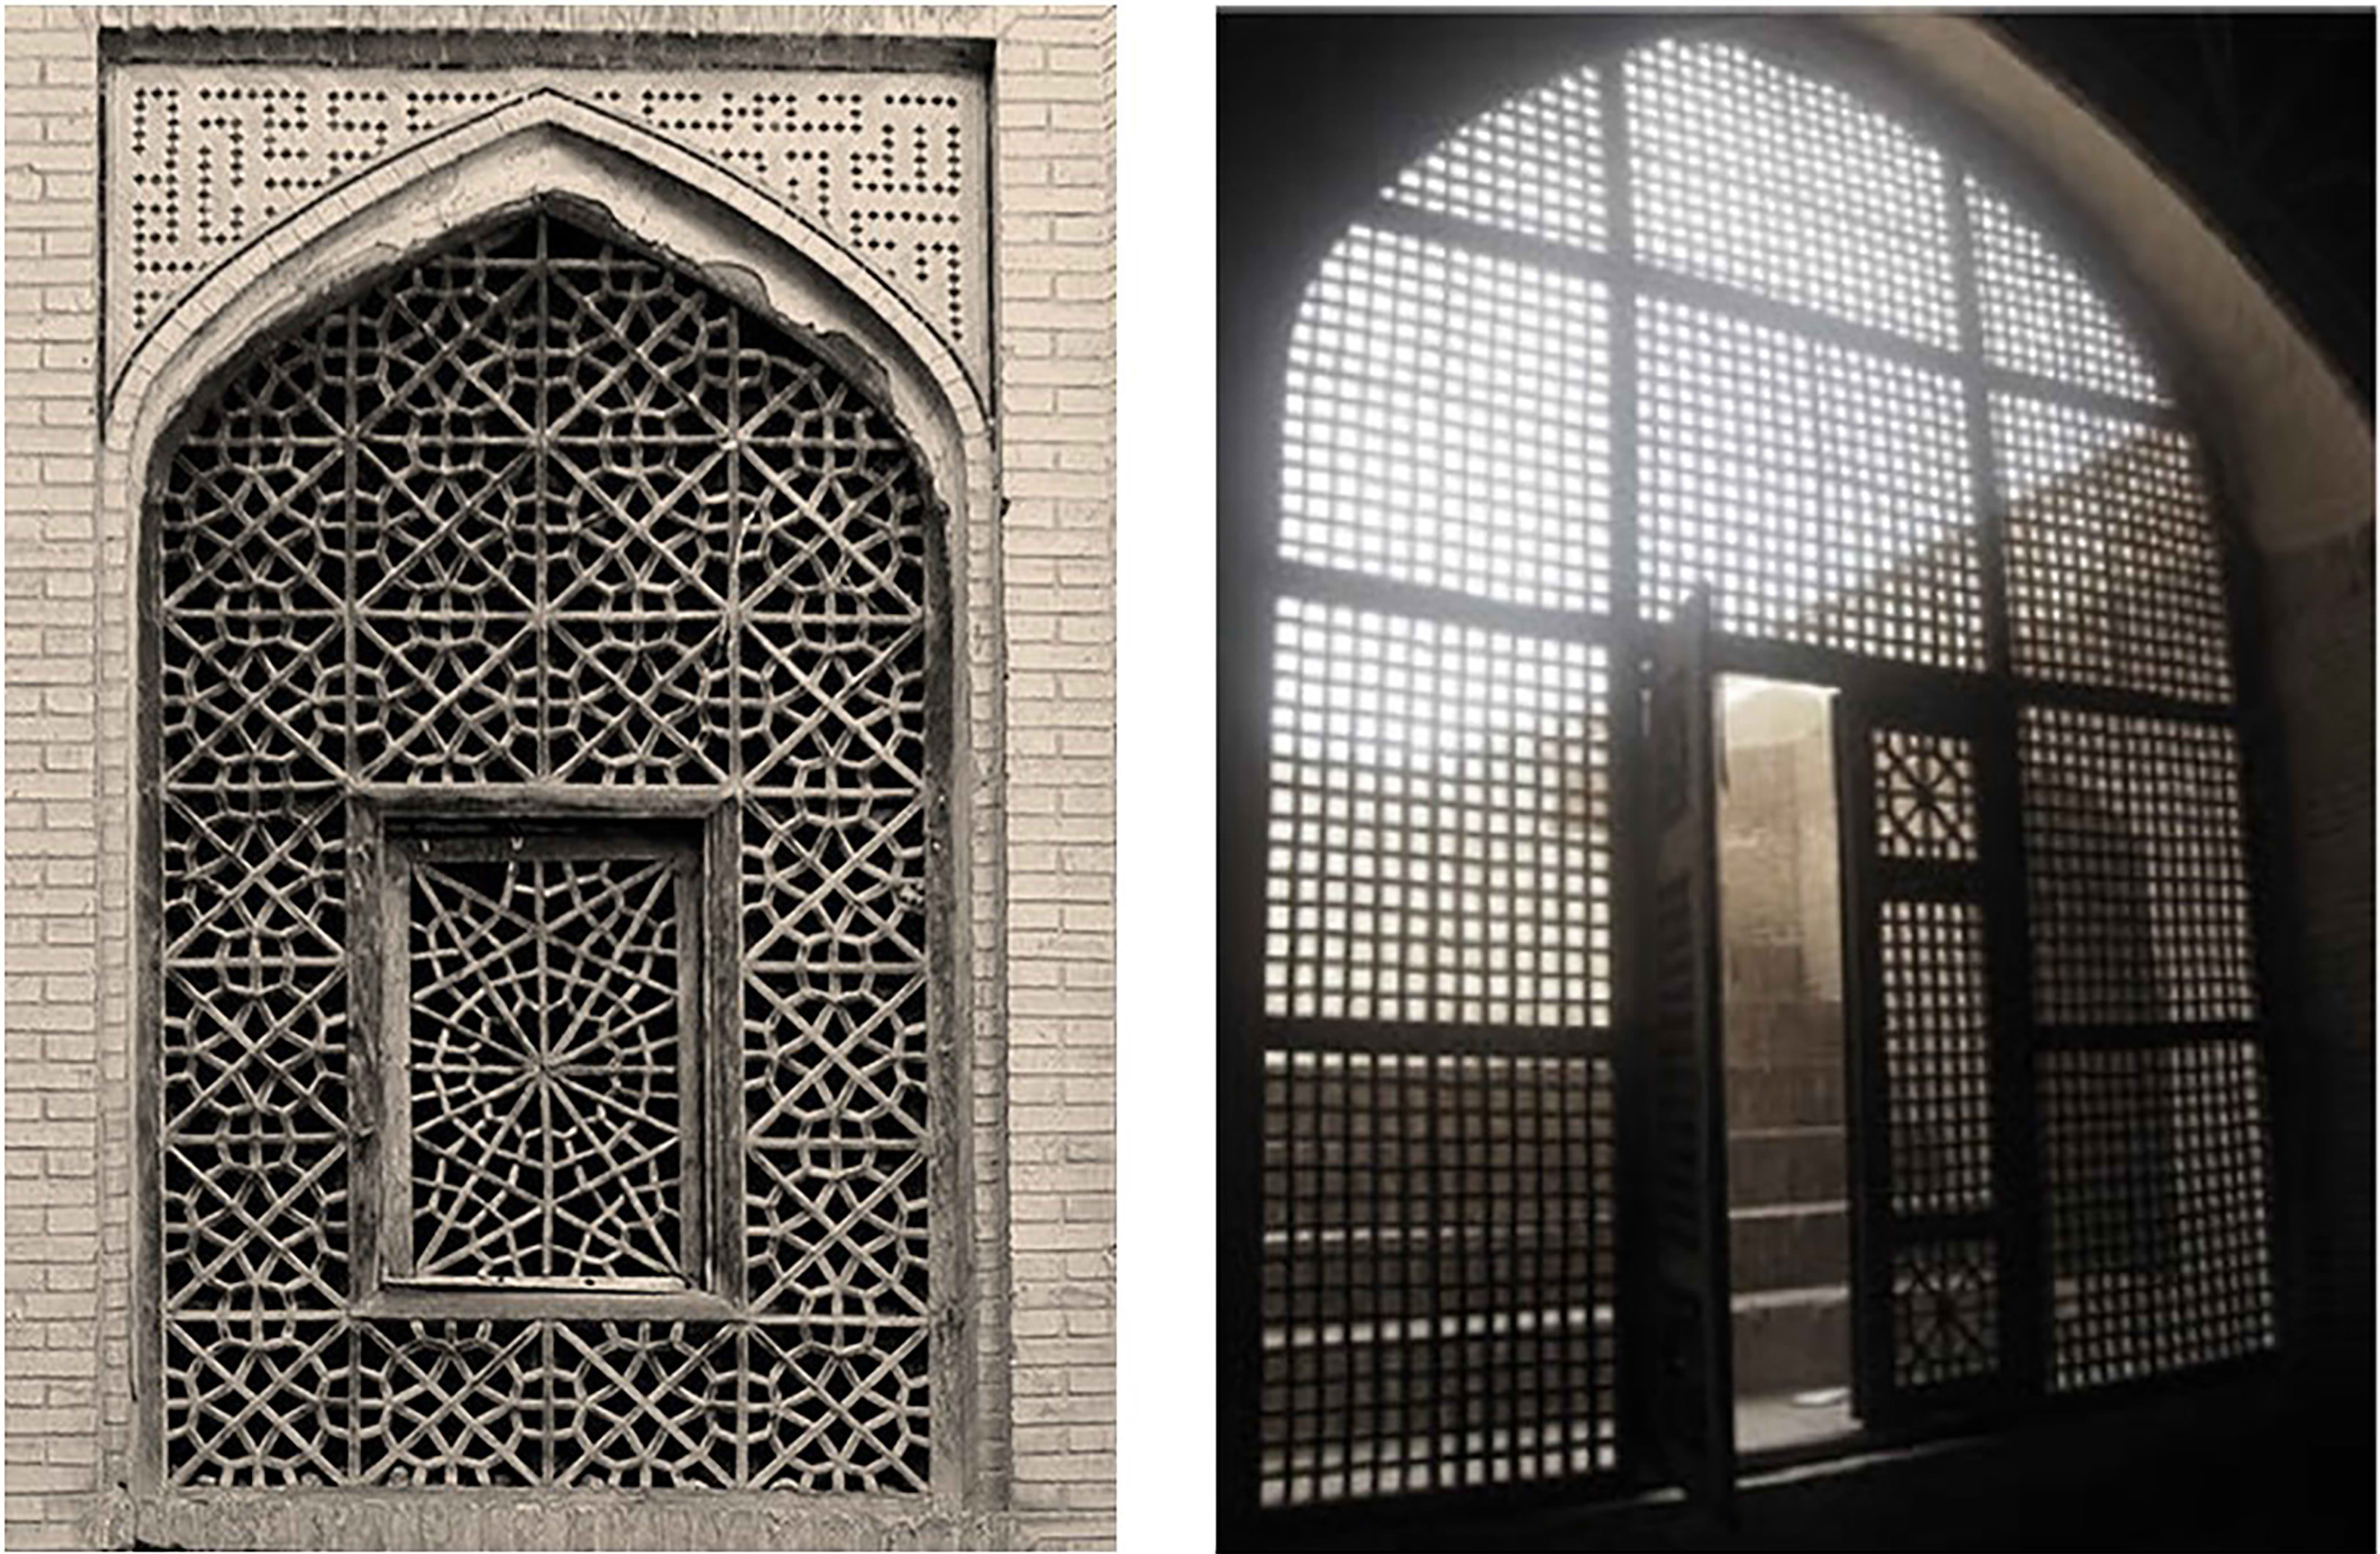 Examples of Moshabak in Iranian architecture. These solar screens are perforated panels that are placed on different parts of the building in order to control light and privacy [5].